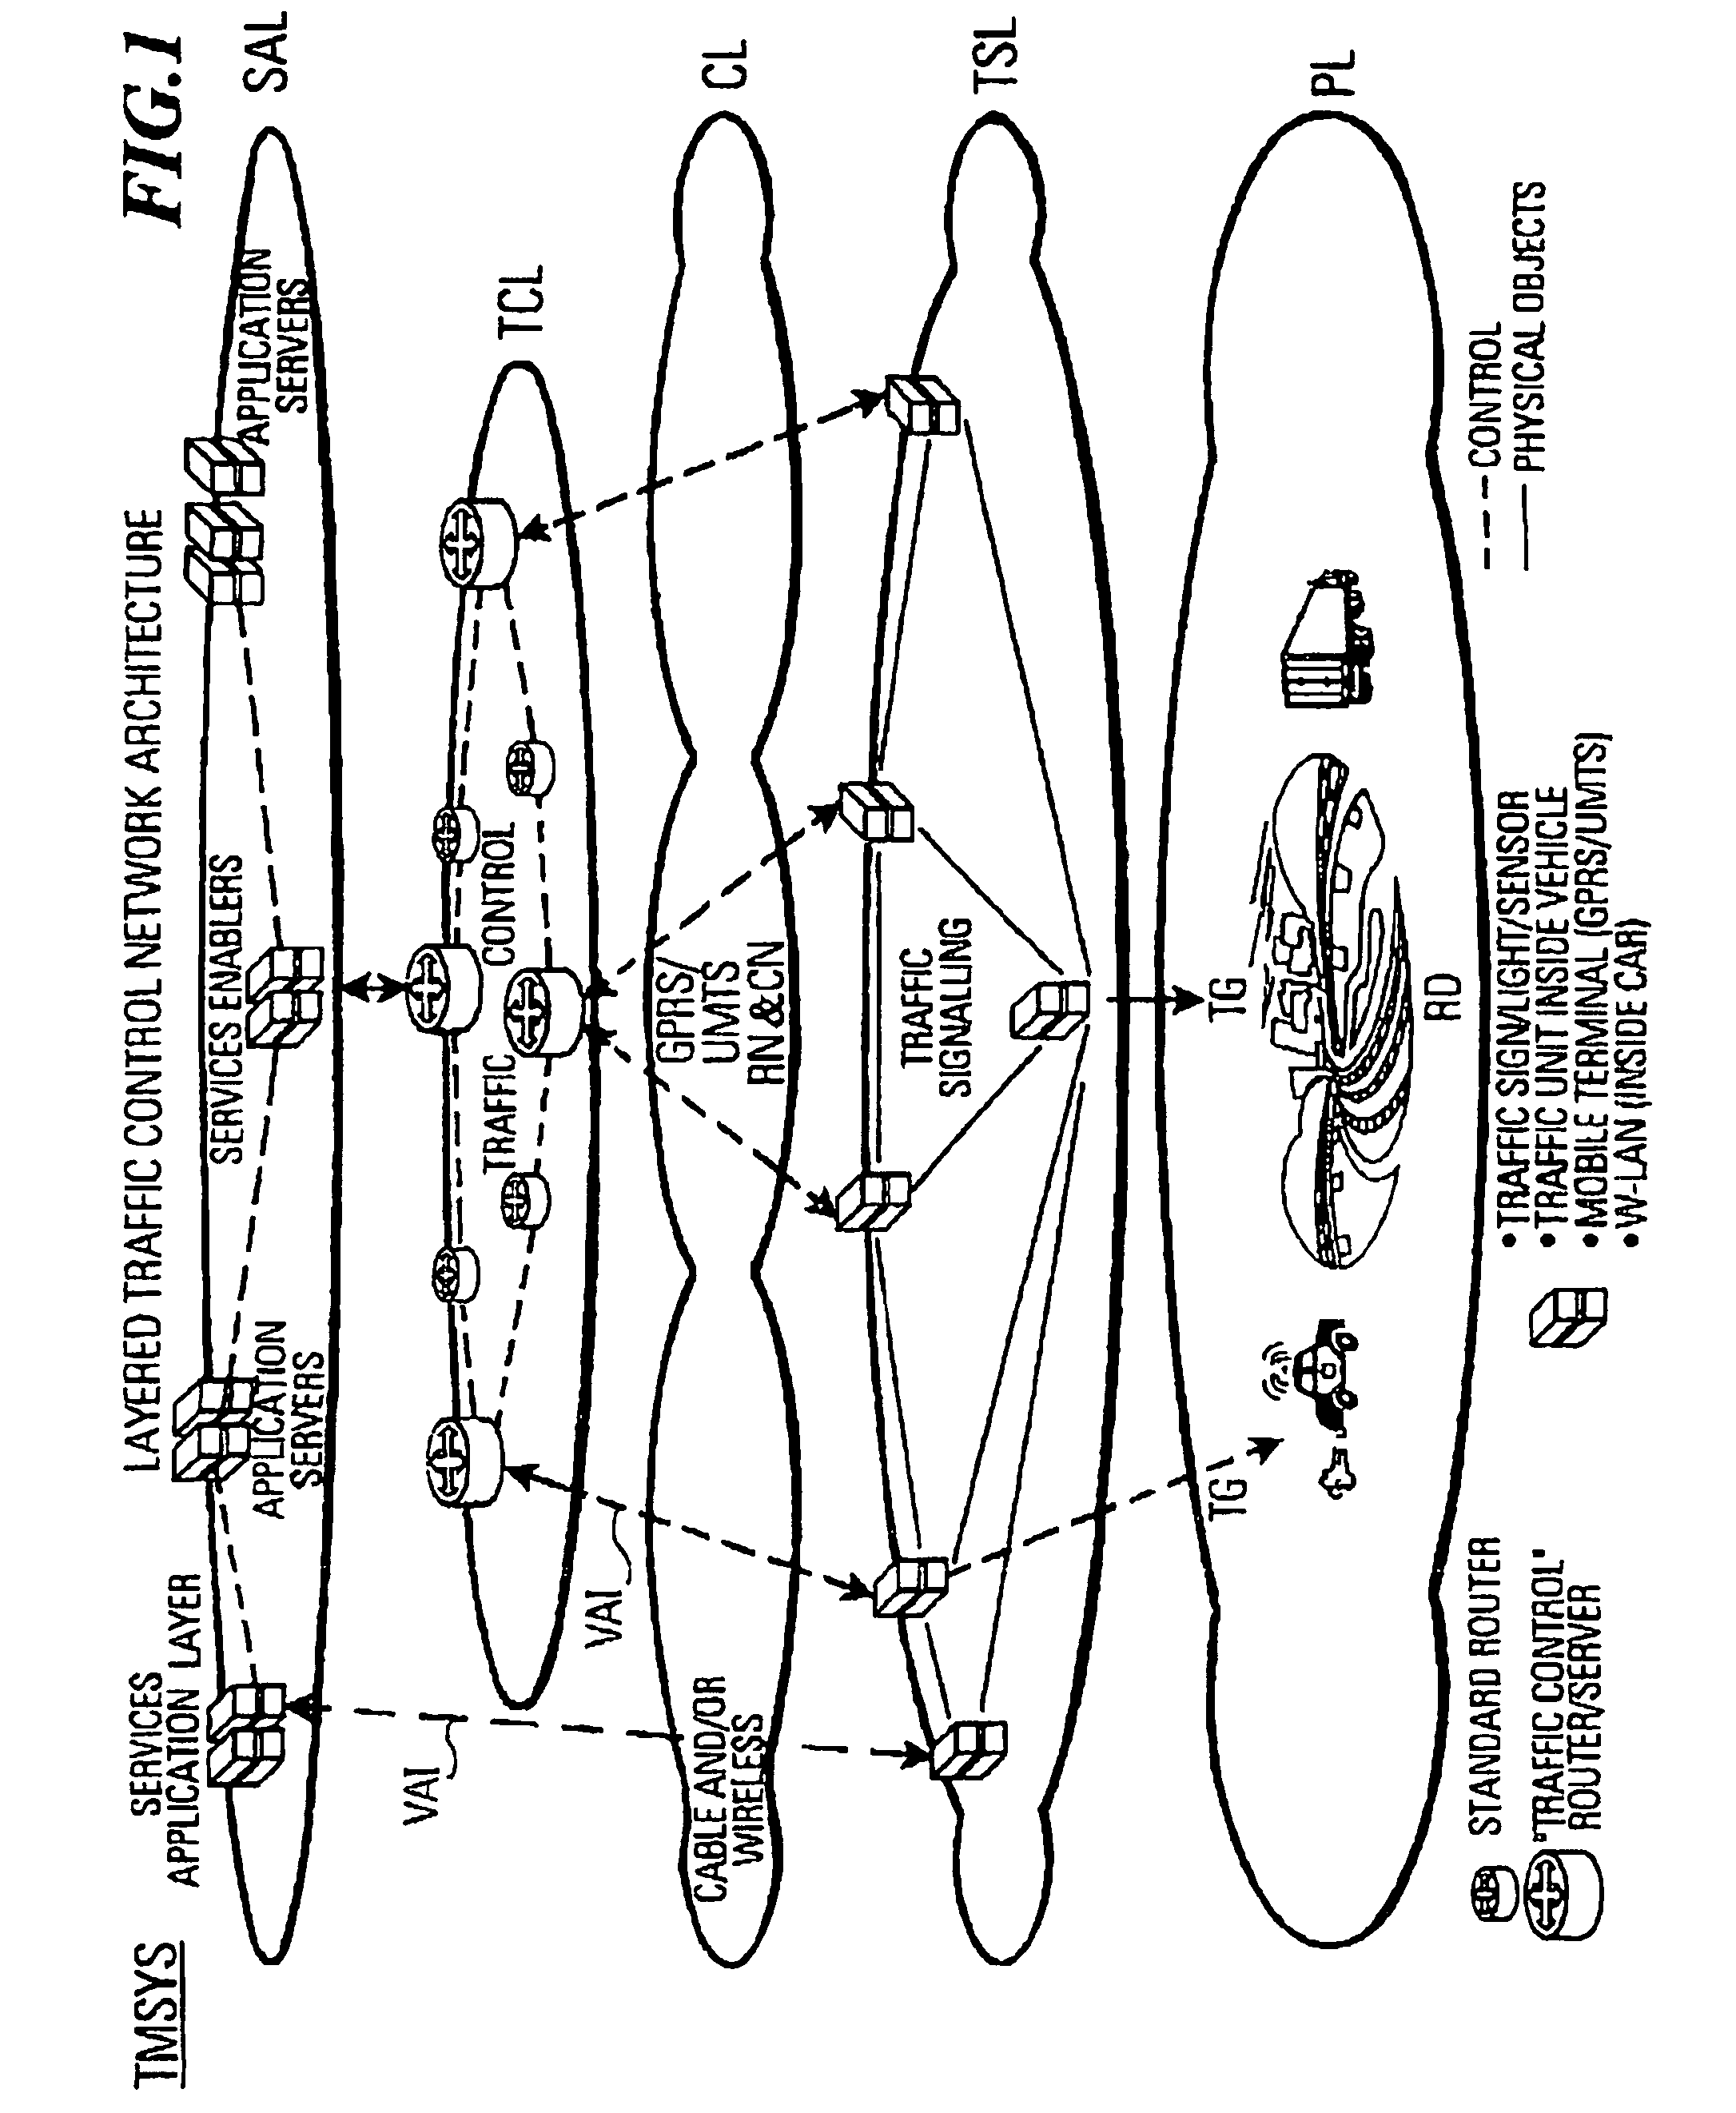 Traffic management system including packet to object synchronization mechanisms